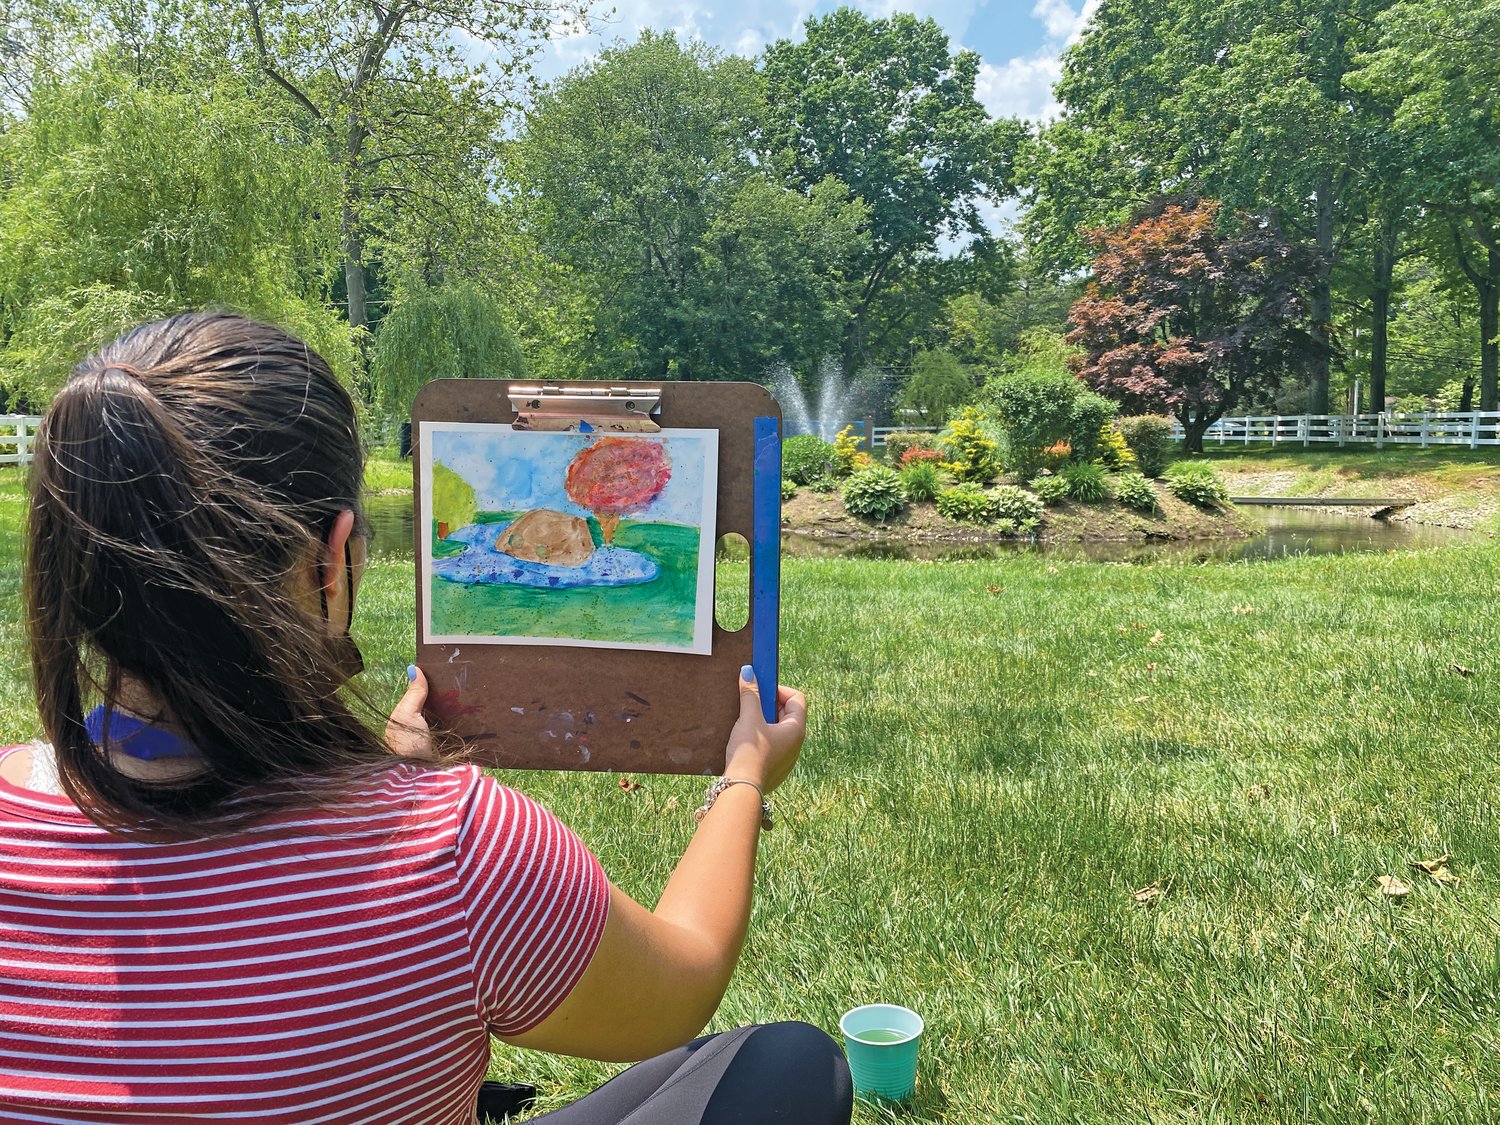 By painting outdoors, participants in “Painting in Nature at Phillips’ Mill,” a teen plein-air workshop series, will learn how to create strong compositions and capture the color and light they find in natural settings.